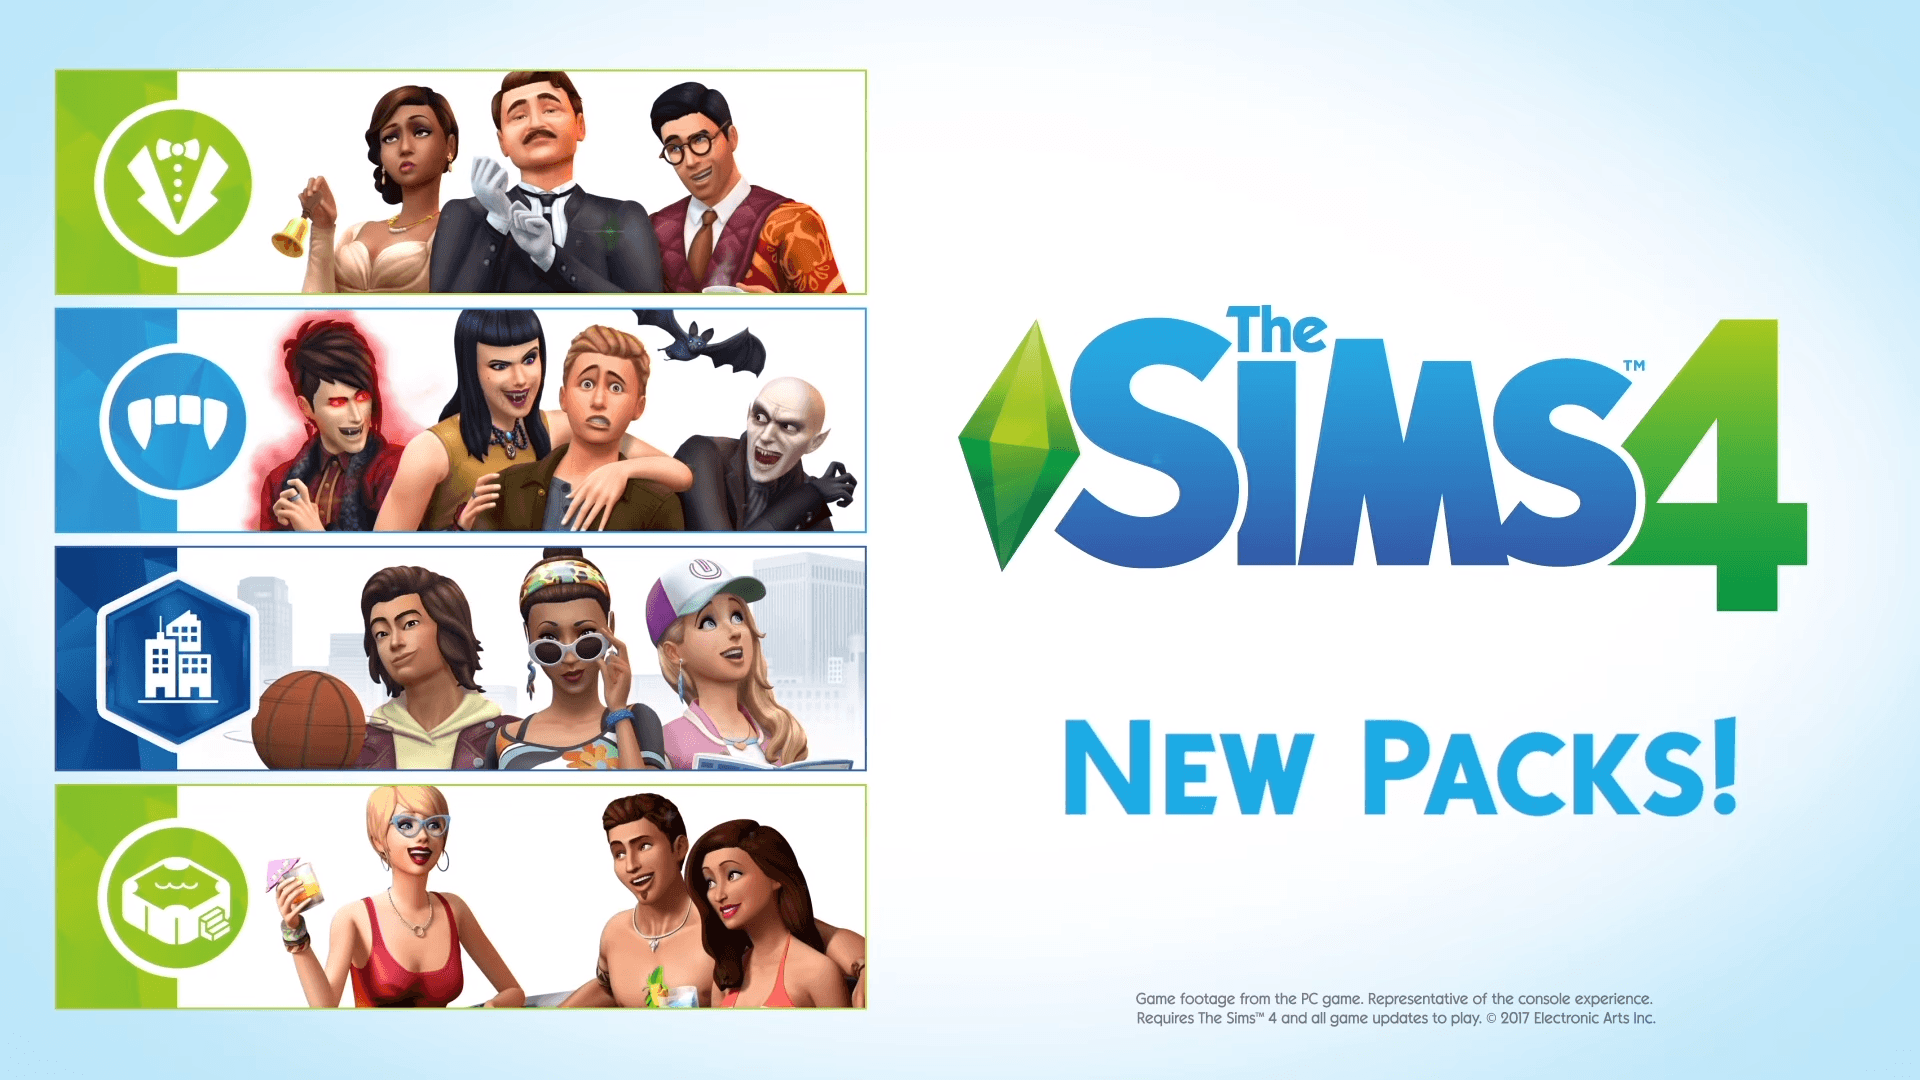 The Sims 4 Arriving on PS4 in November And DLC Trailer Revealed